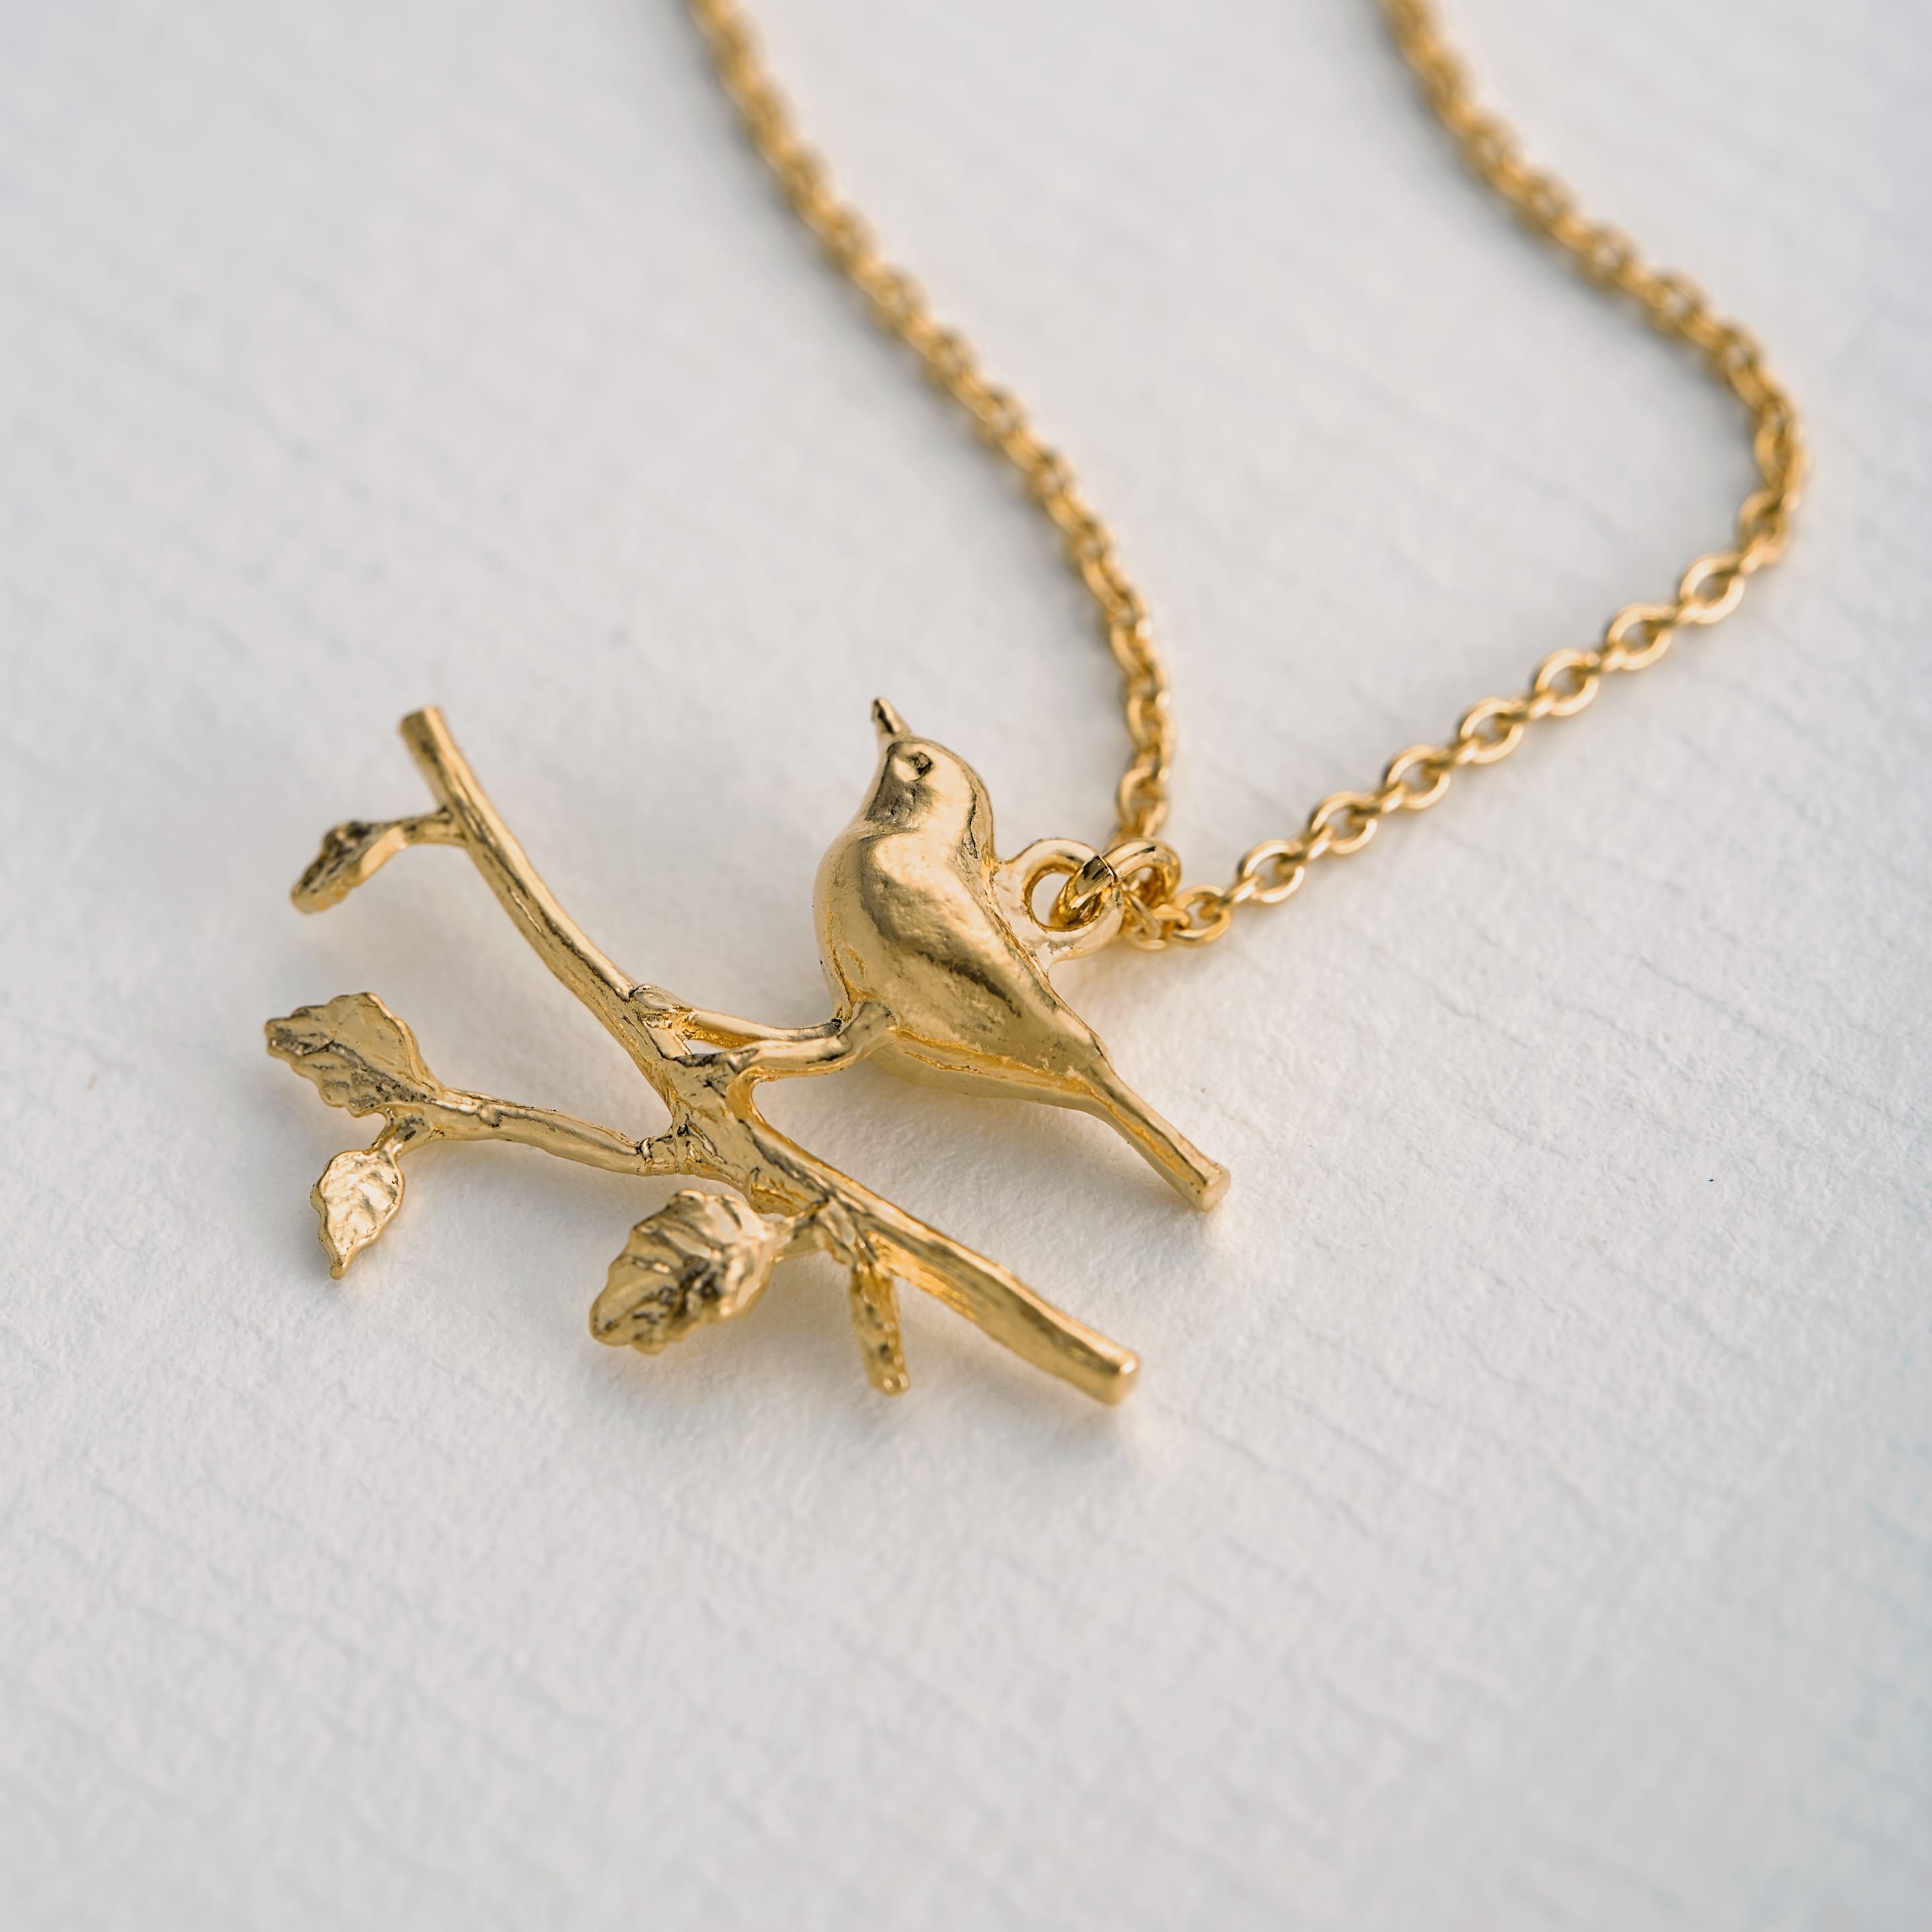 Gold Bird Pendant Necklace - Factory Direct Jewelry